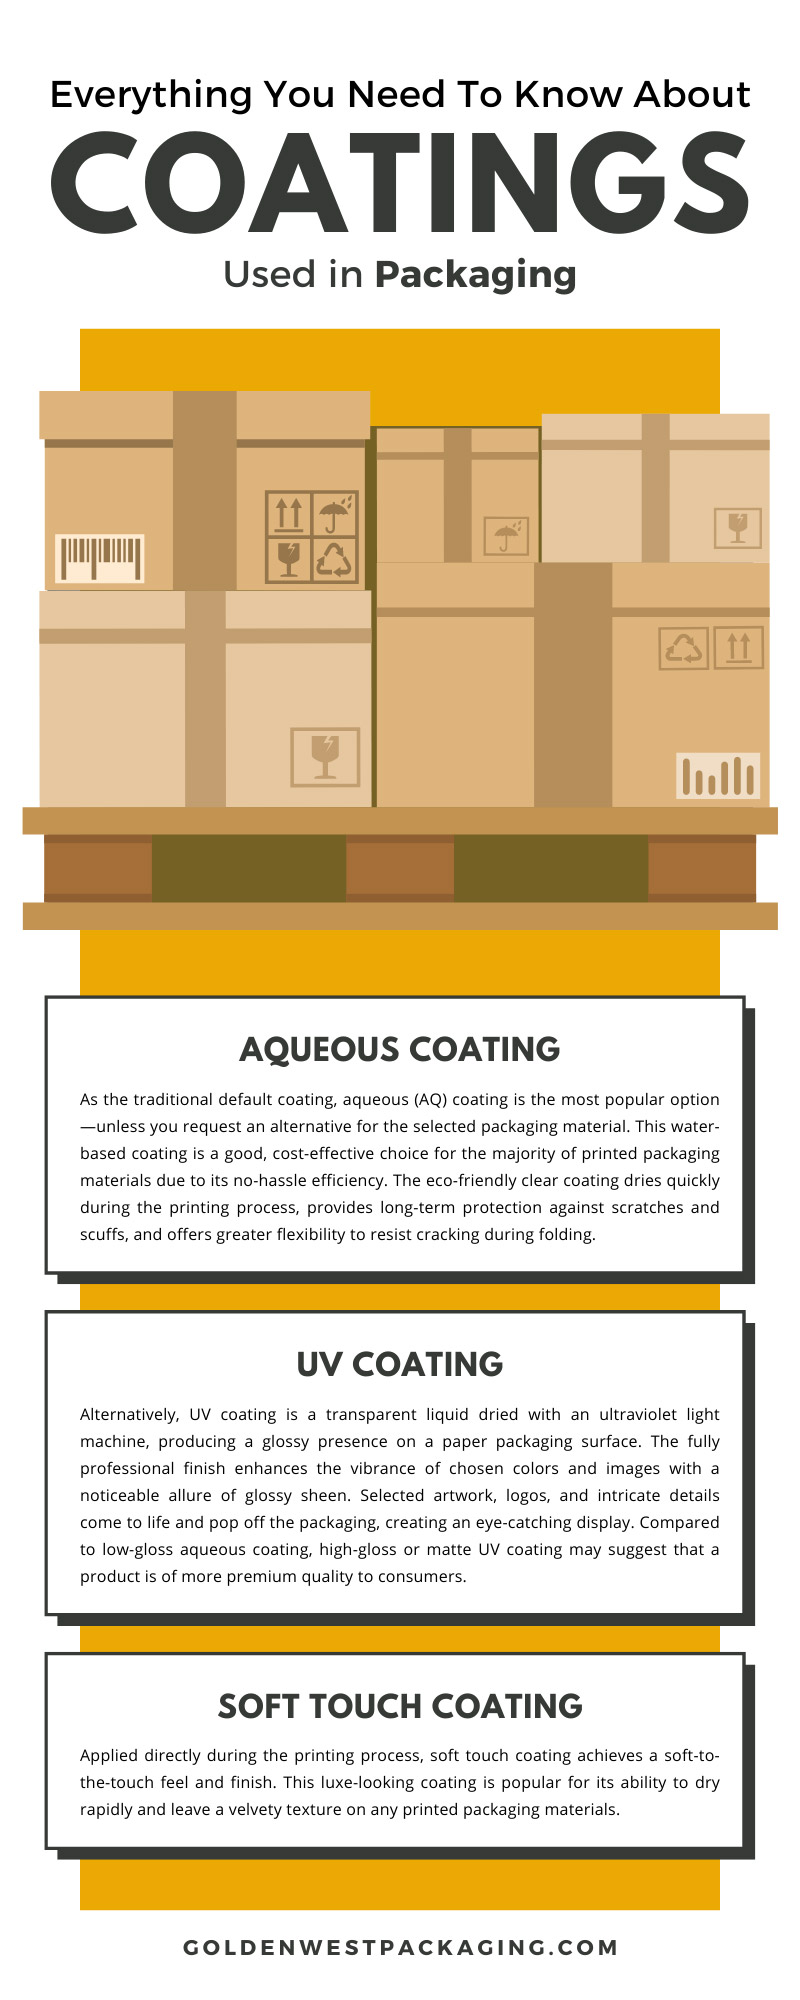 Everything You Need To Know About Coatings Used in Packaging